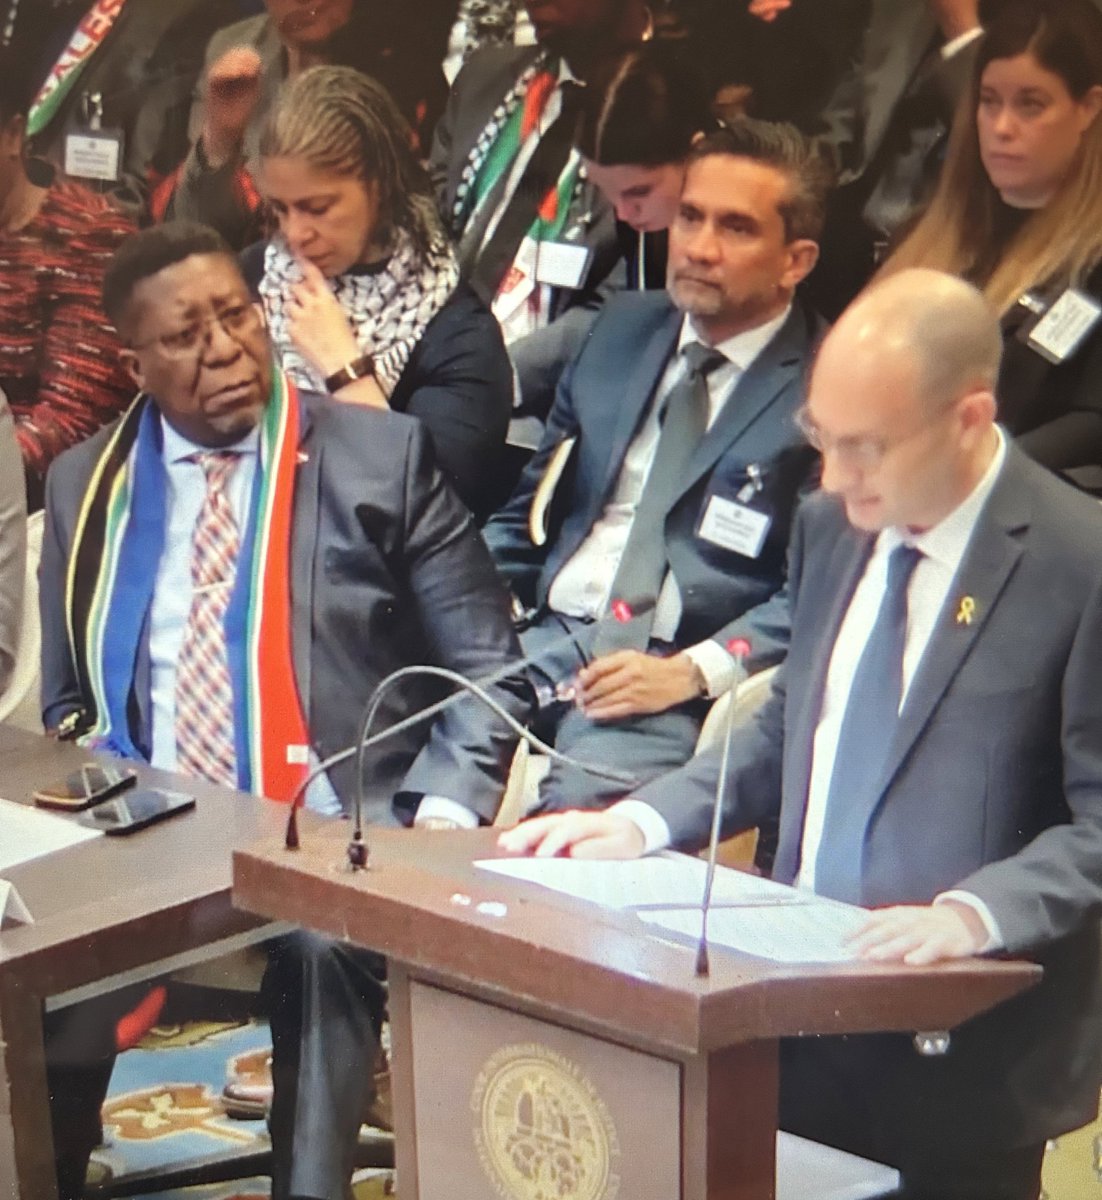 I love how uncle stayed like this throughout the proceedings to let Israel know South Africa always has Palestine’s back.